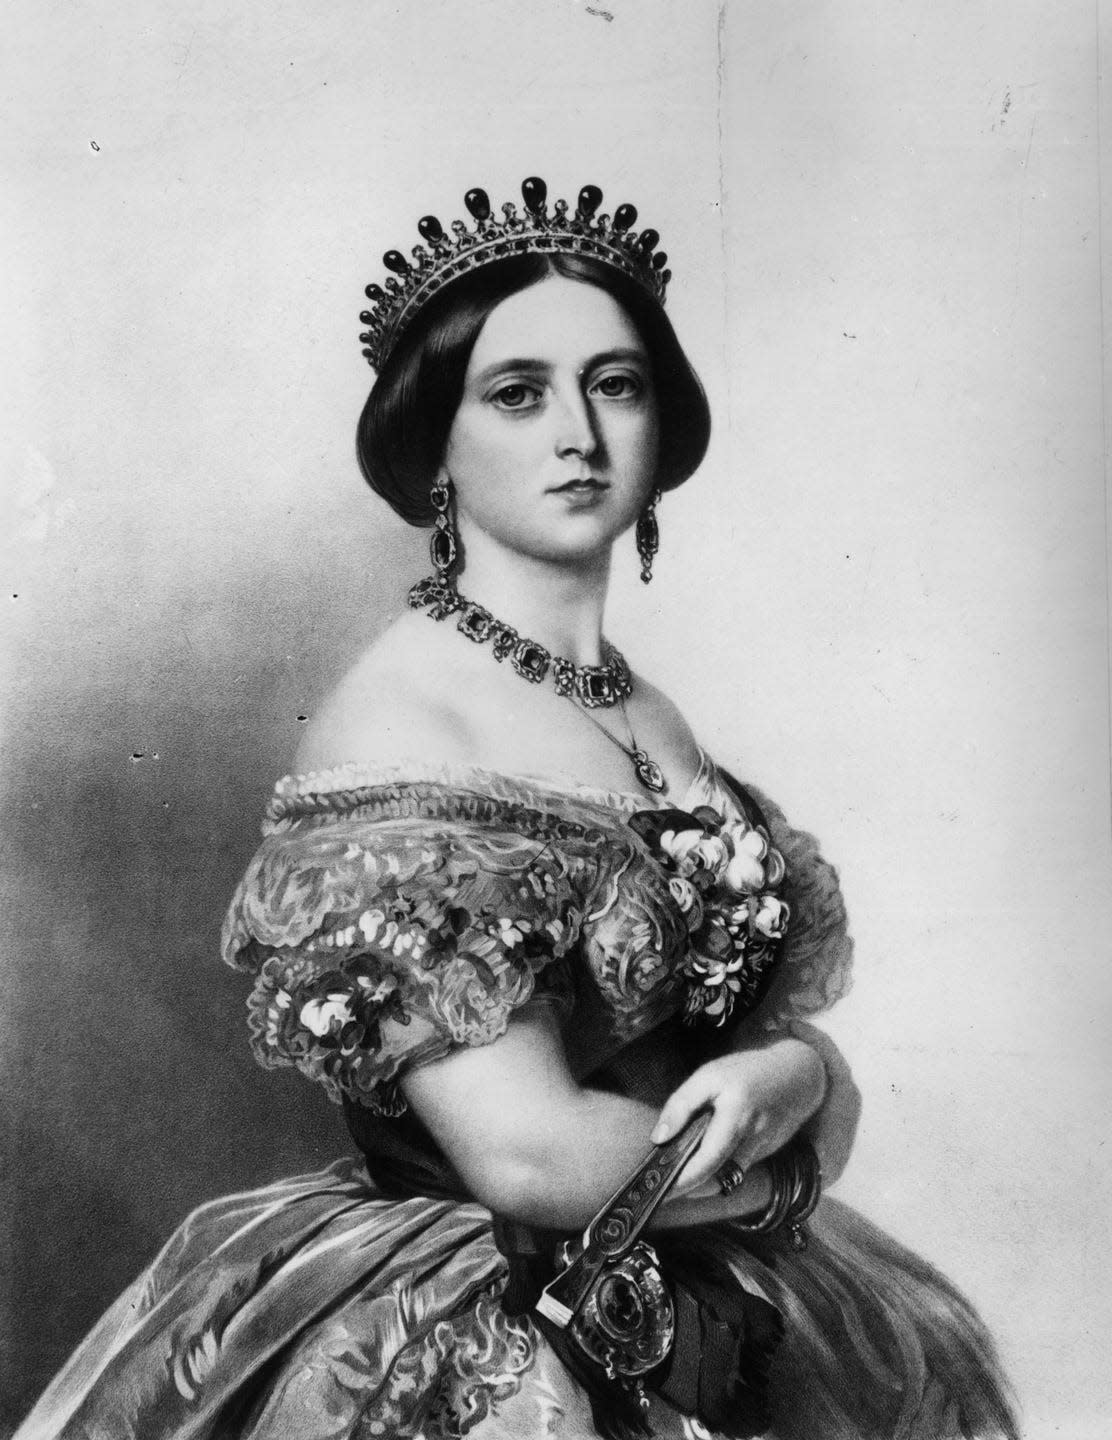 15 Fascinating Things You Didn't Know About Queen Victoria